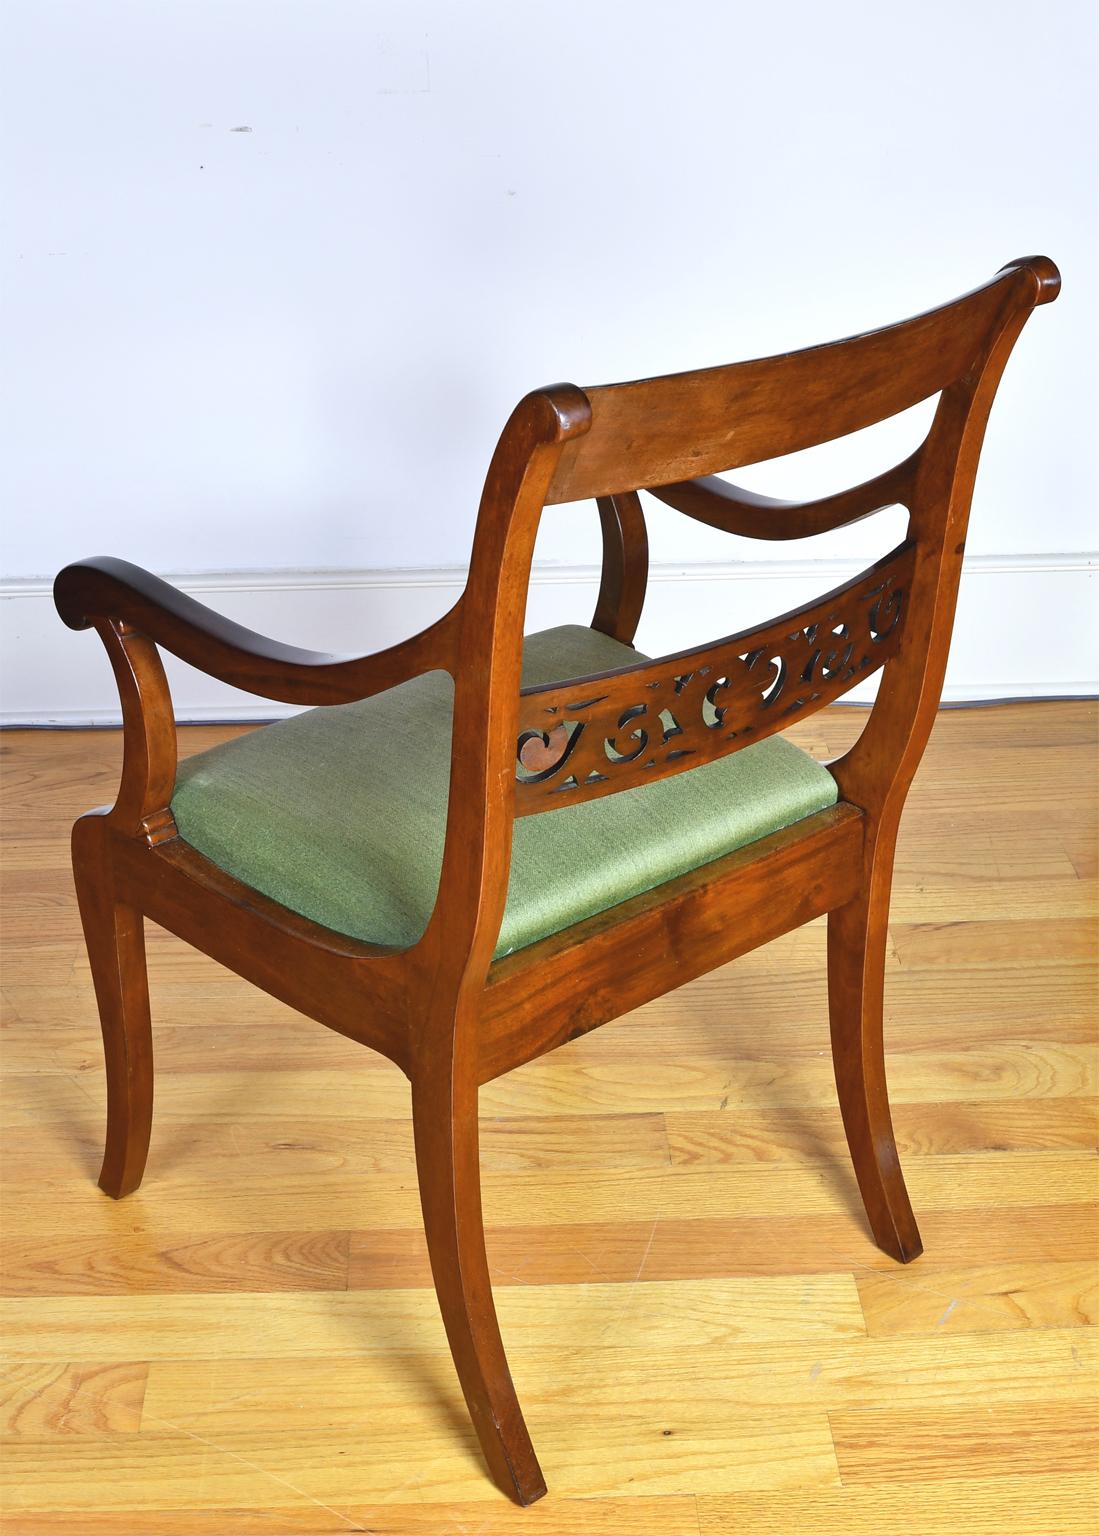 Regency Set of 11 Antique Dining Chairs with 9 Sides & 2 Arms in West Indies Mahogany For Sale